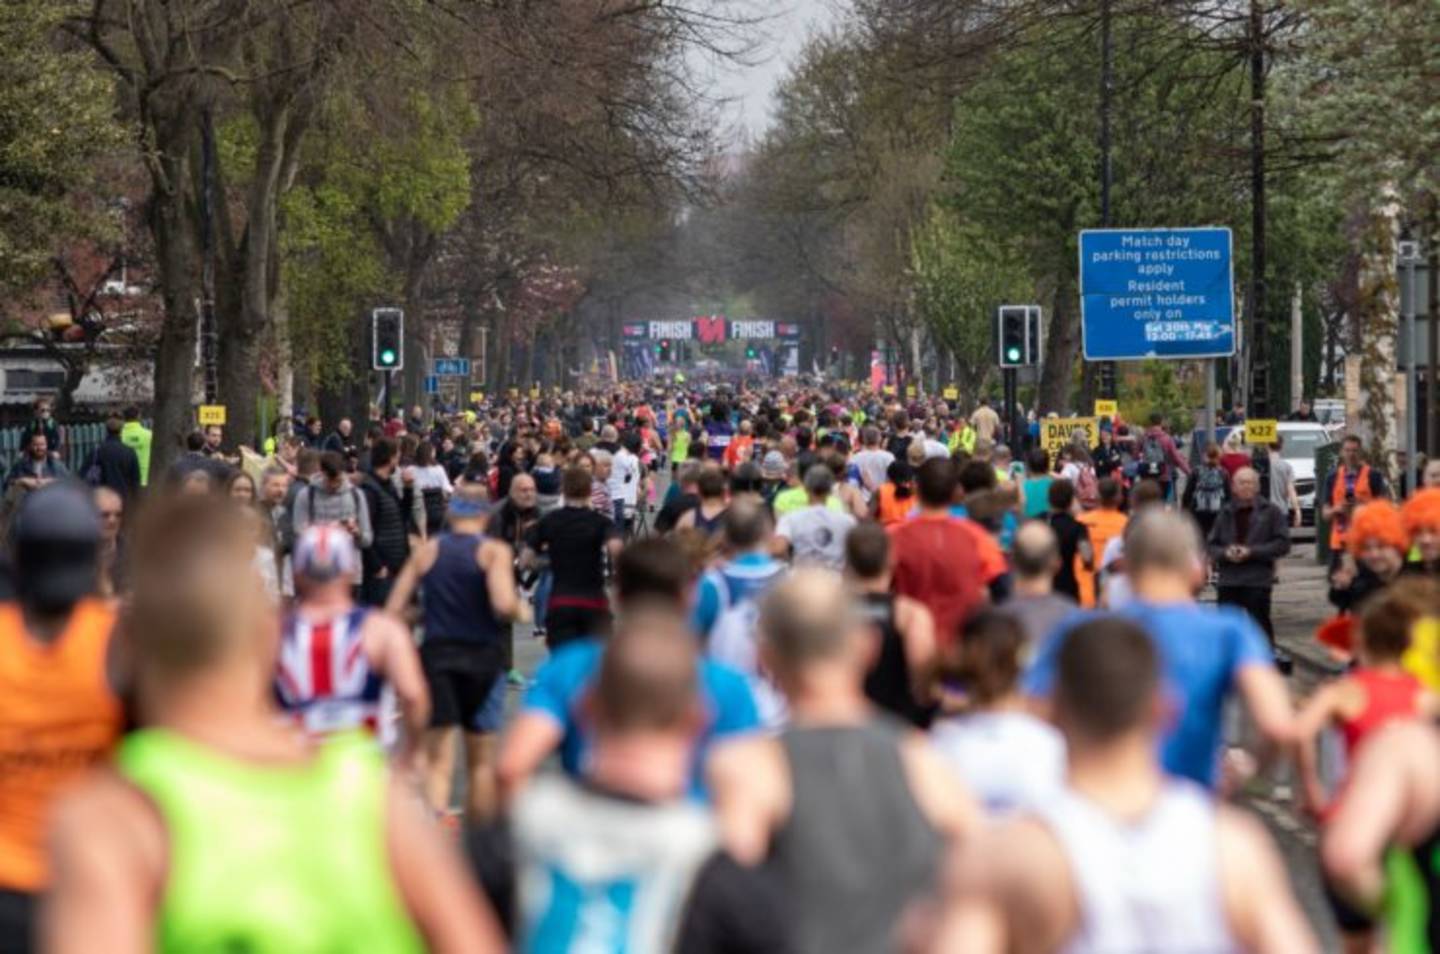 Runners on course during Asics Manchester Marathon